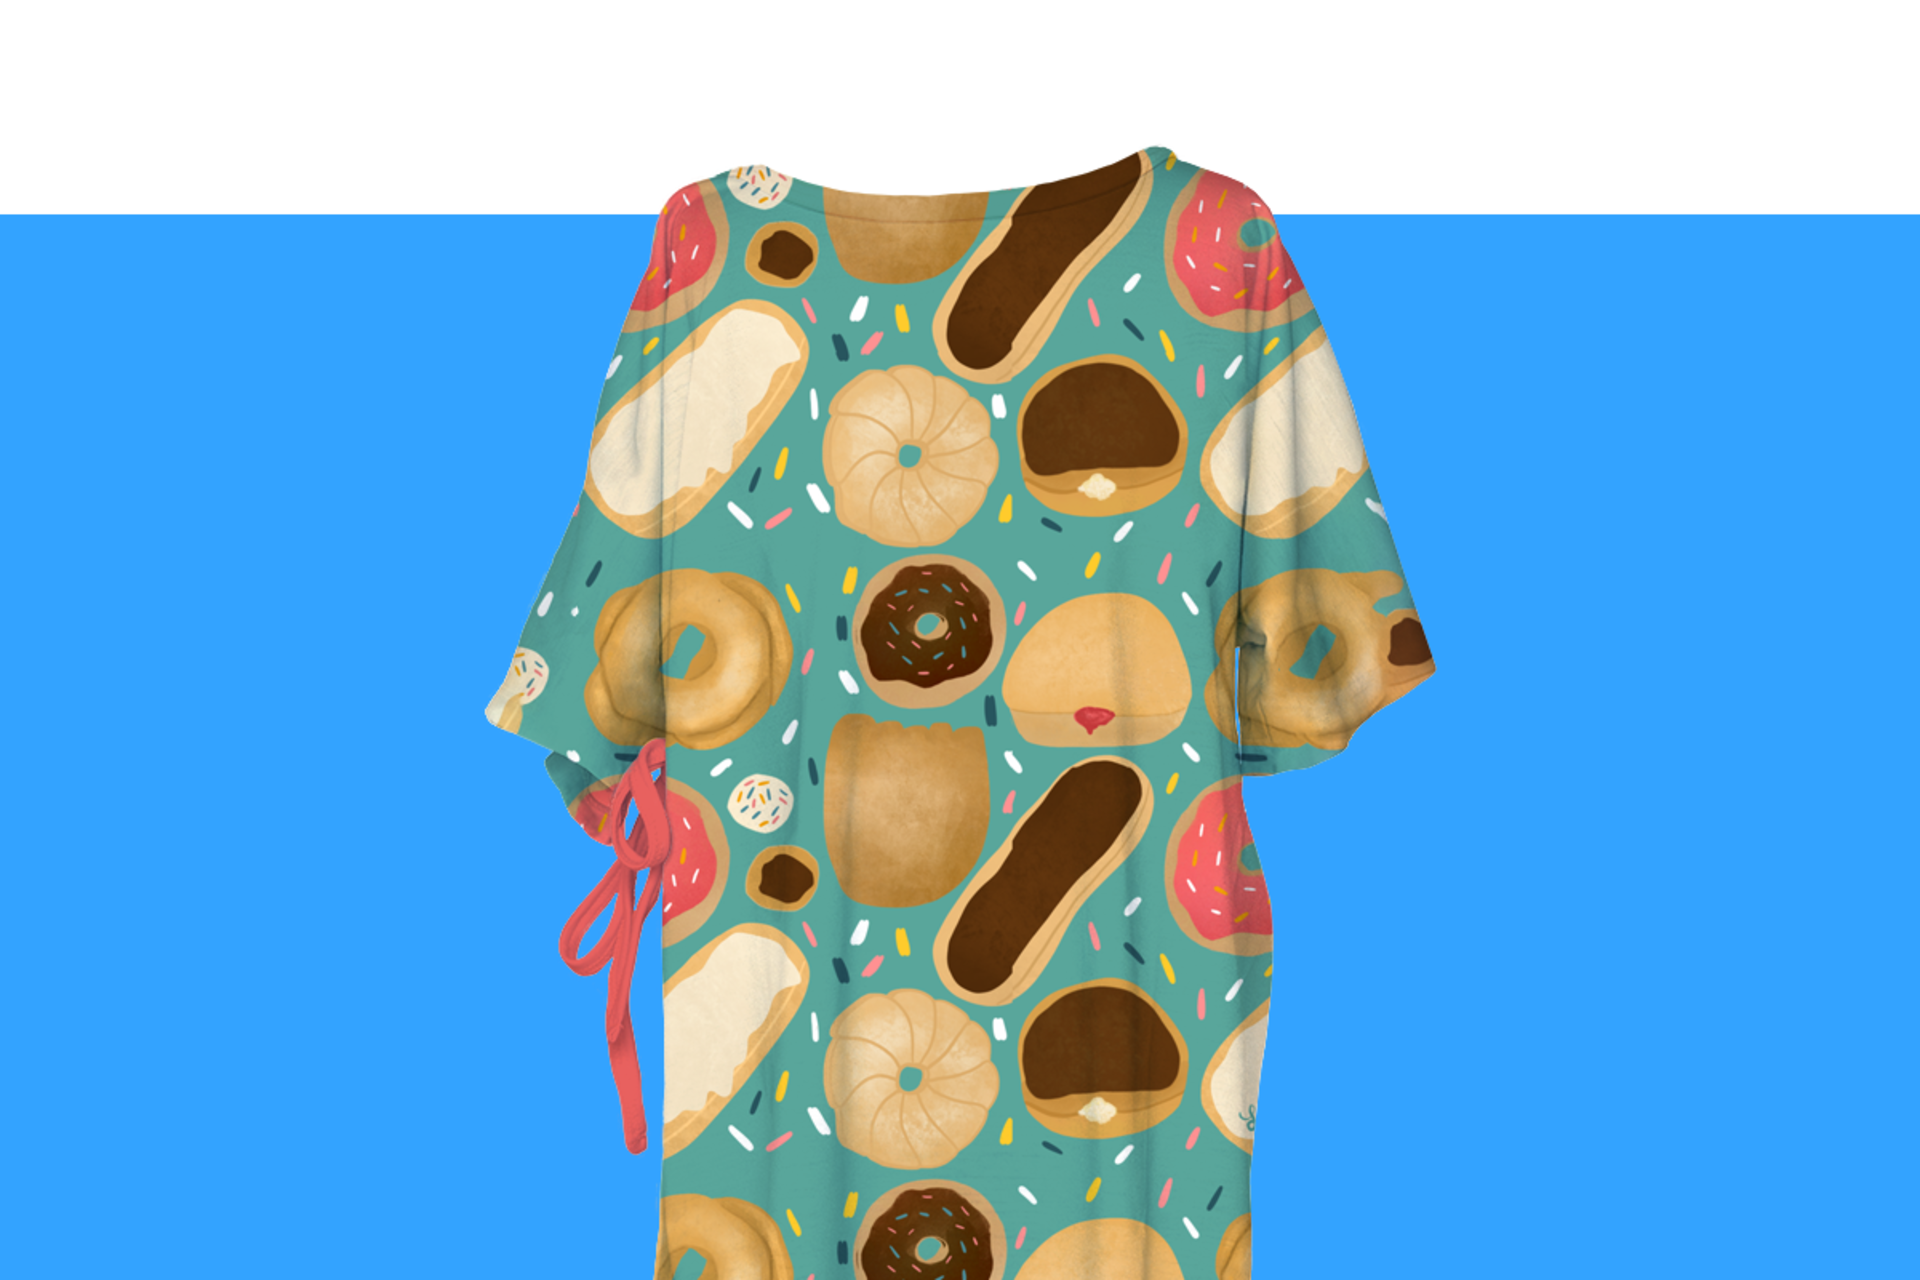 Hospital gown with donuts and sprinkles